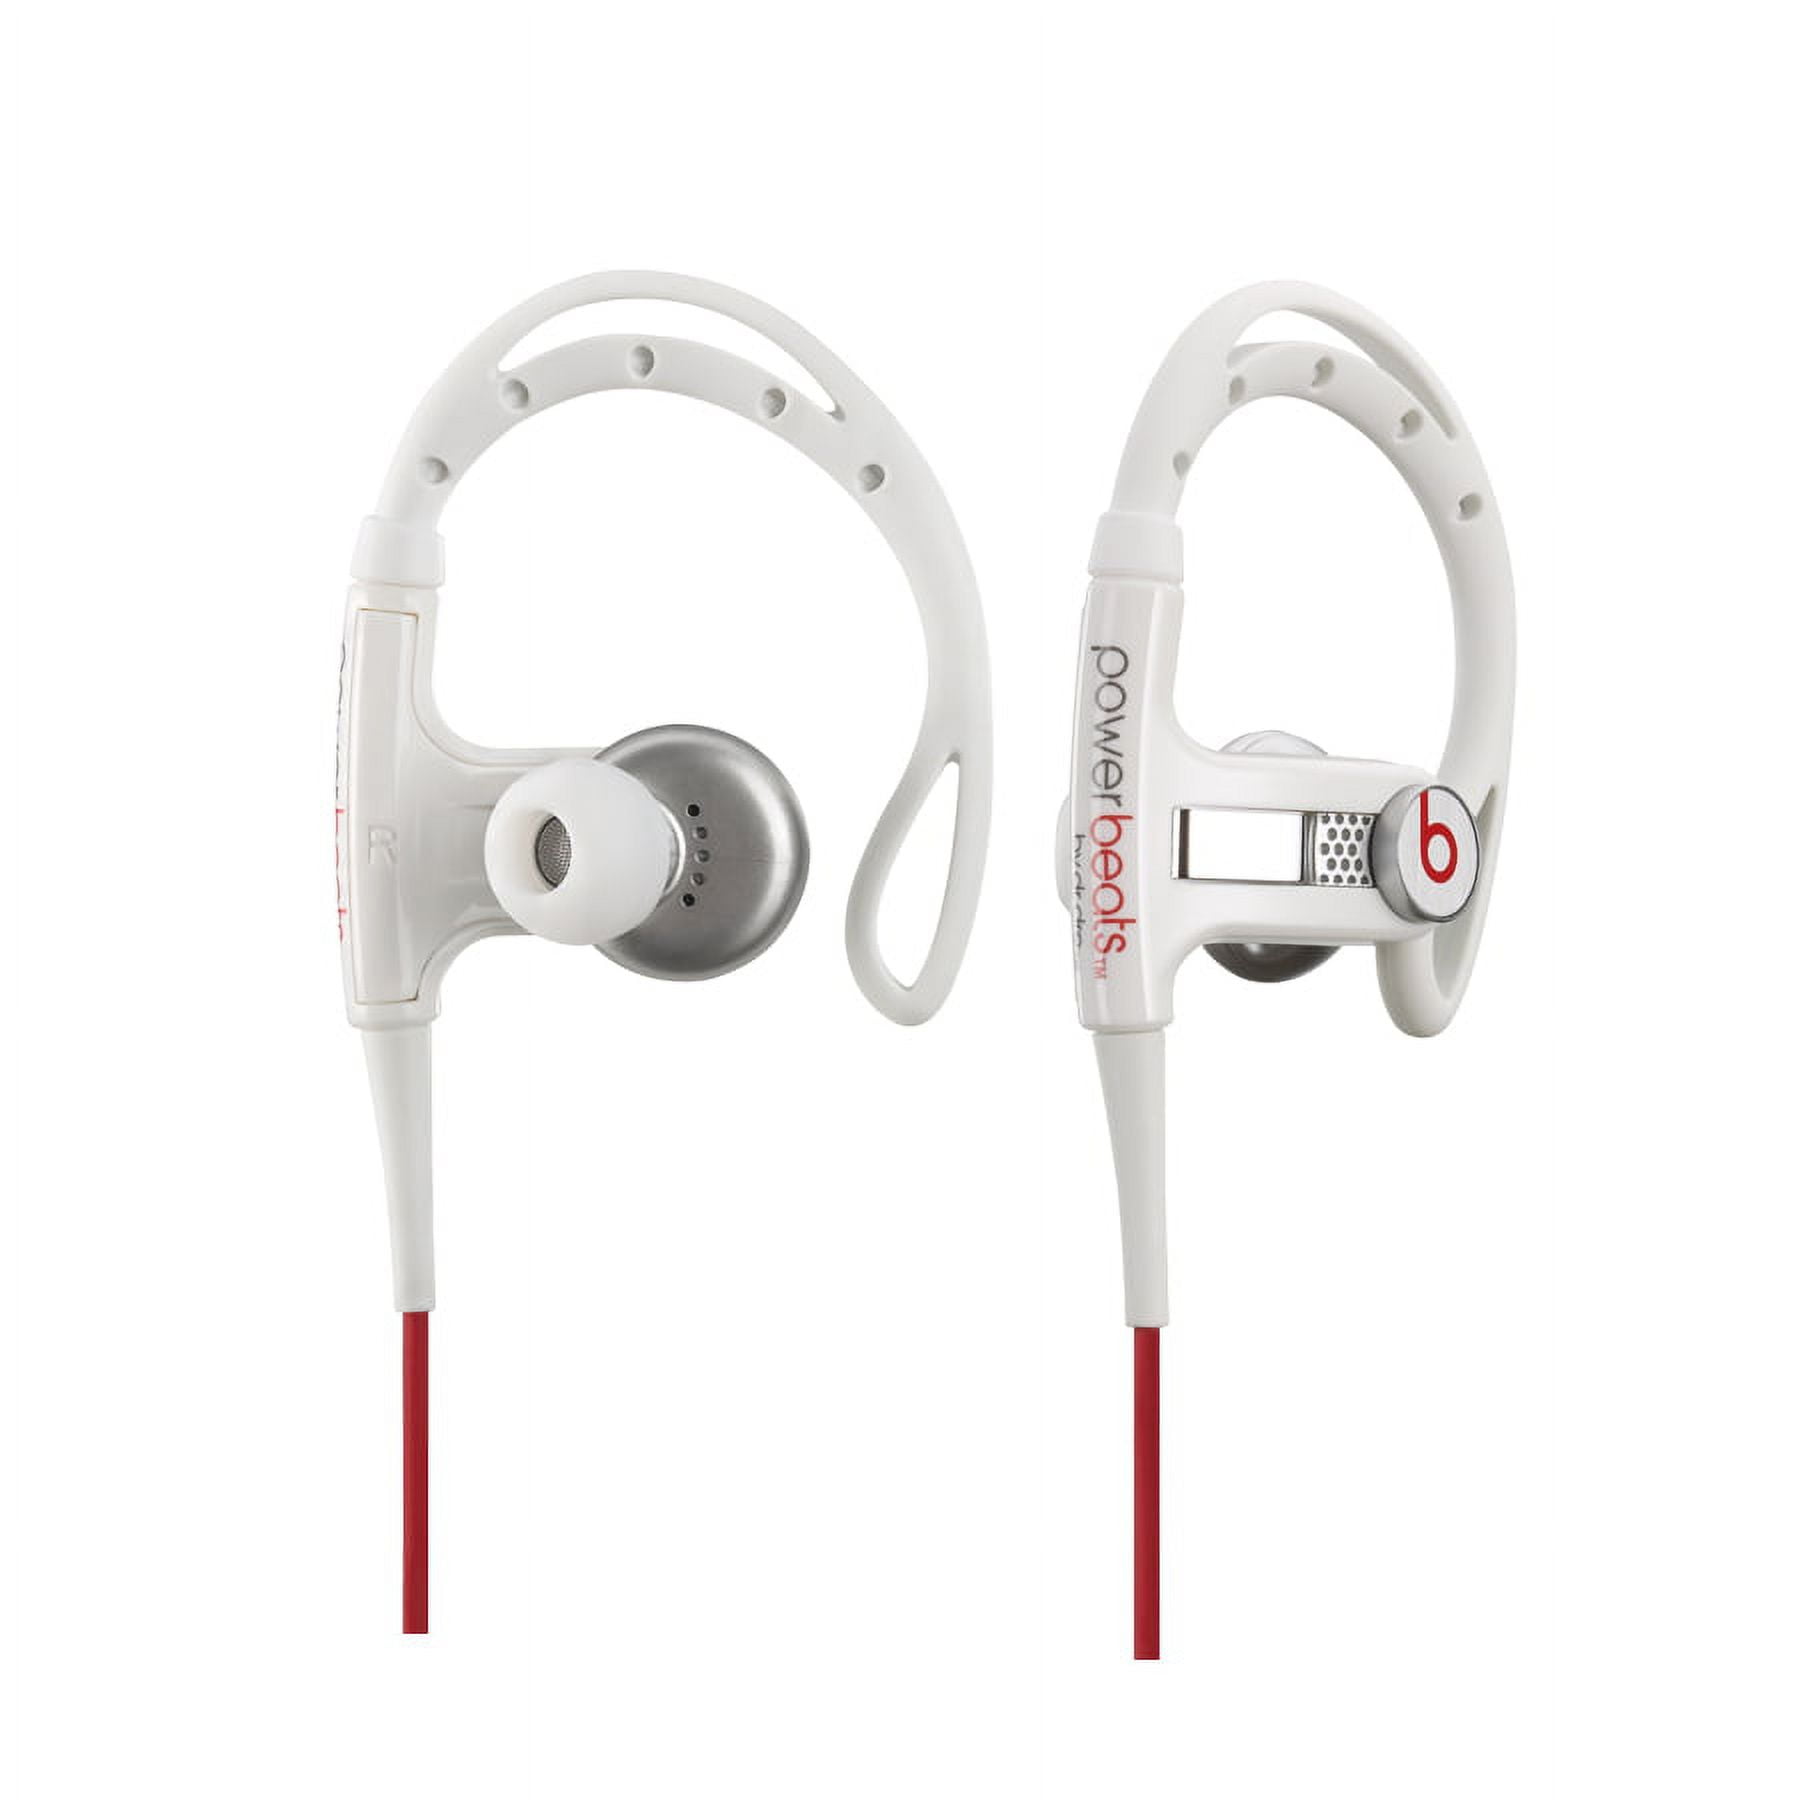 Restored Beats by Dr. Dre PowerBeats White Wired In Ear Headphones  H9784VC/A (Refurbished)